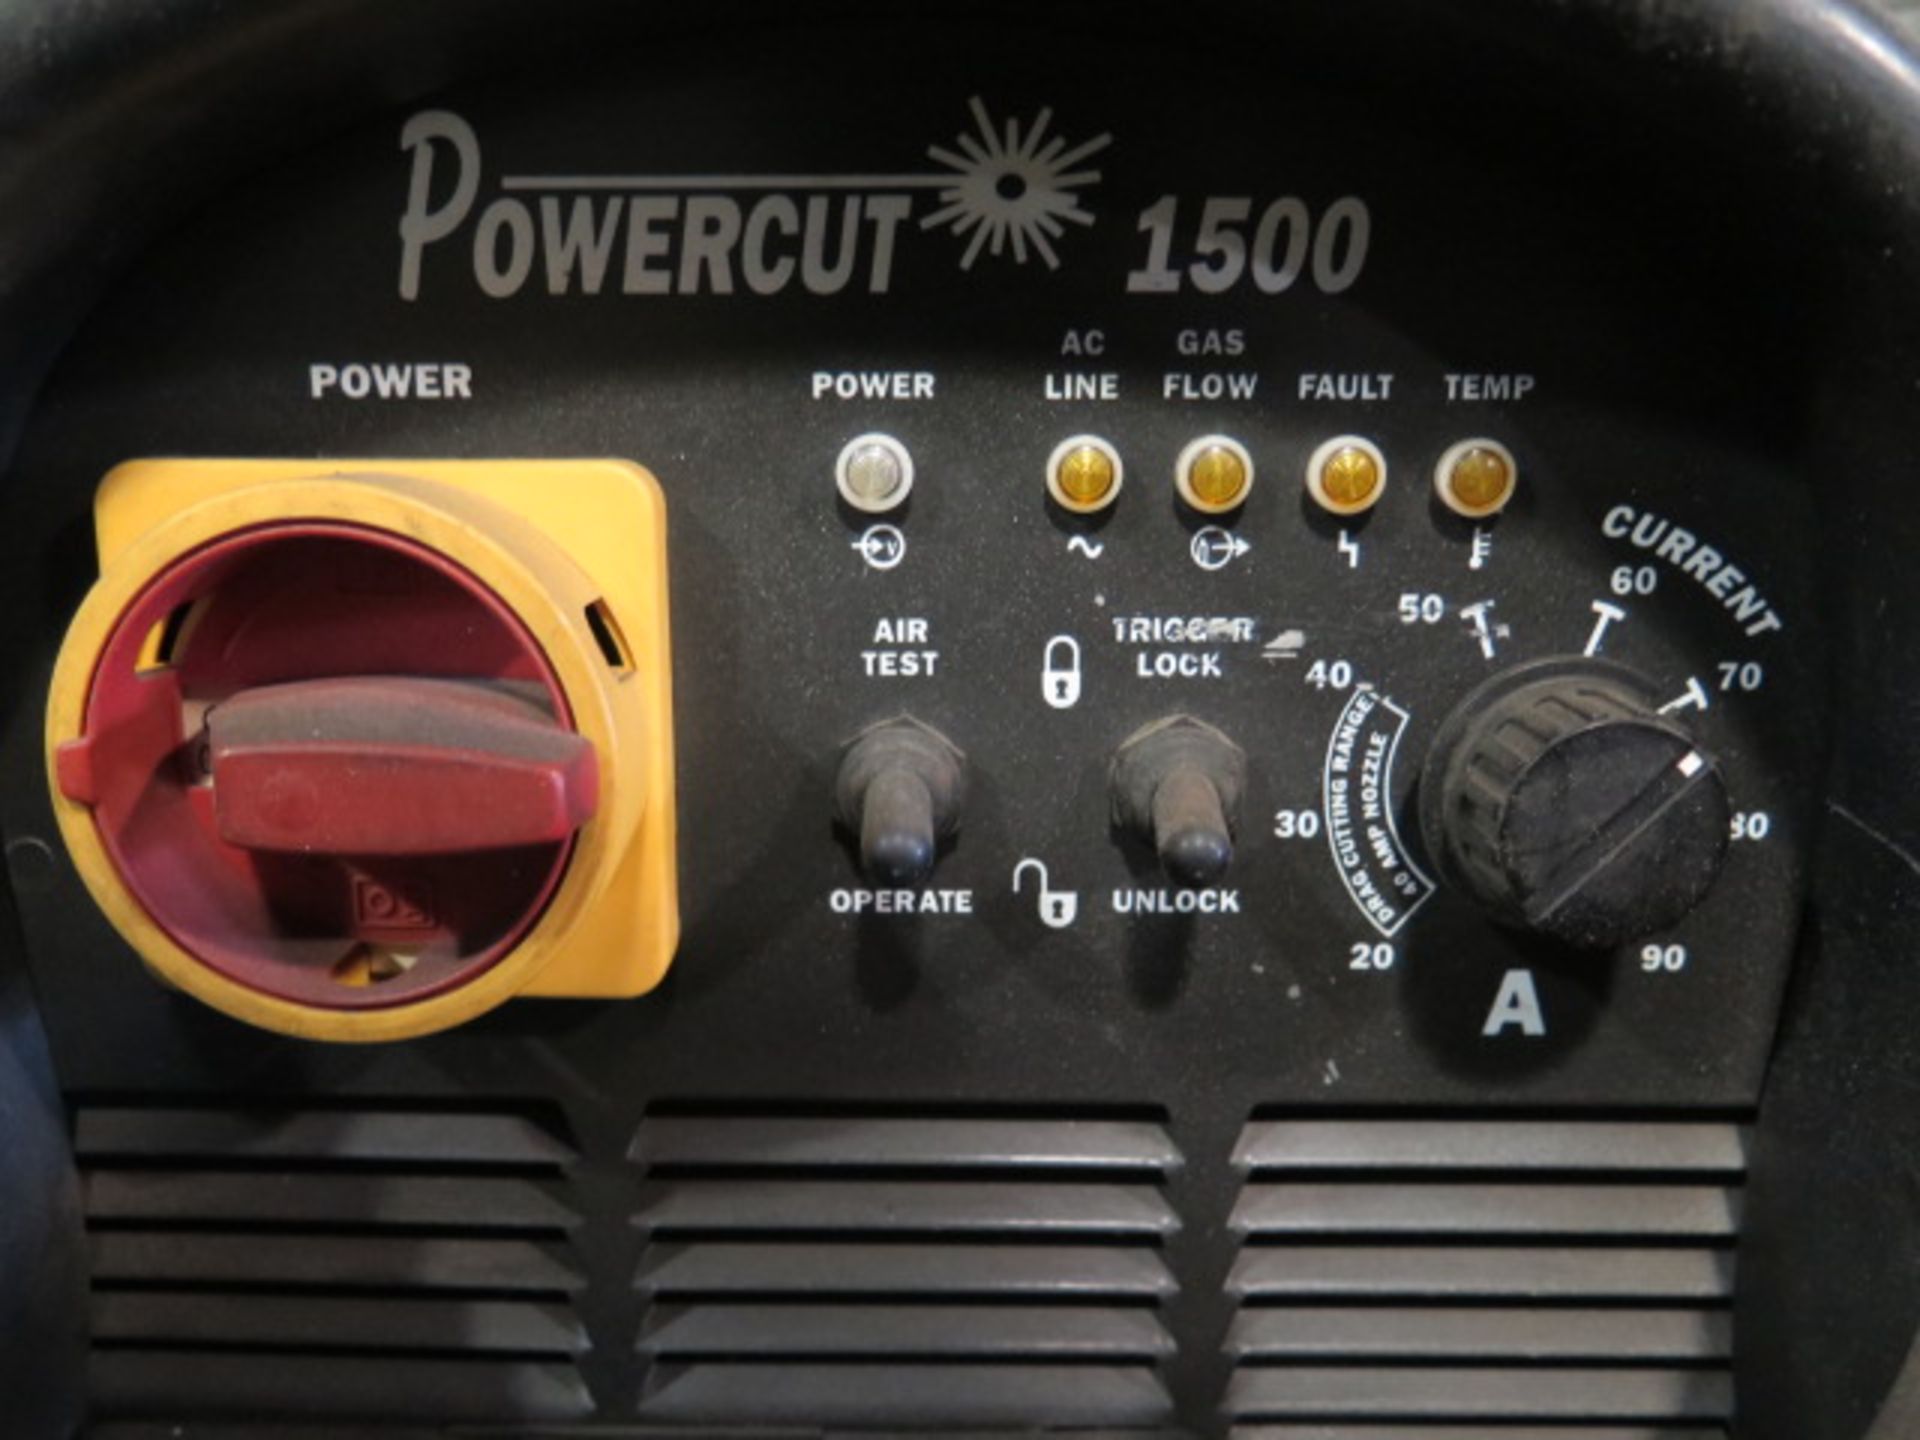 Esab Power Cut 1500 Plasma Power Source (SOLD AS-IS - NO WARRANTY) - Image 4 of 8